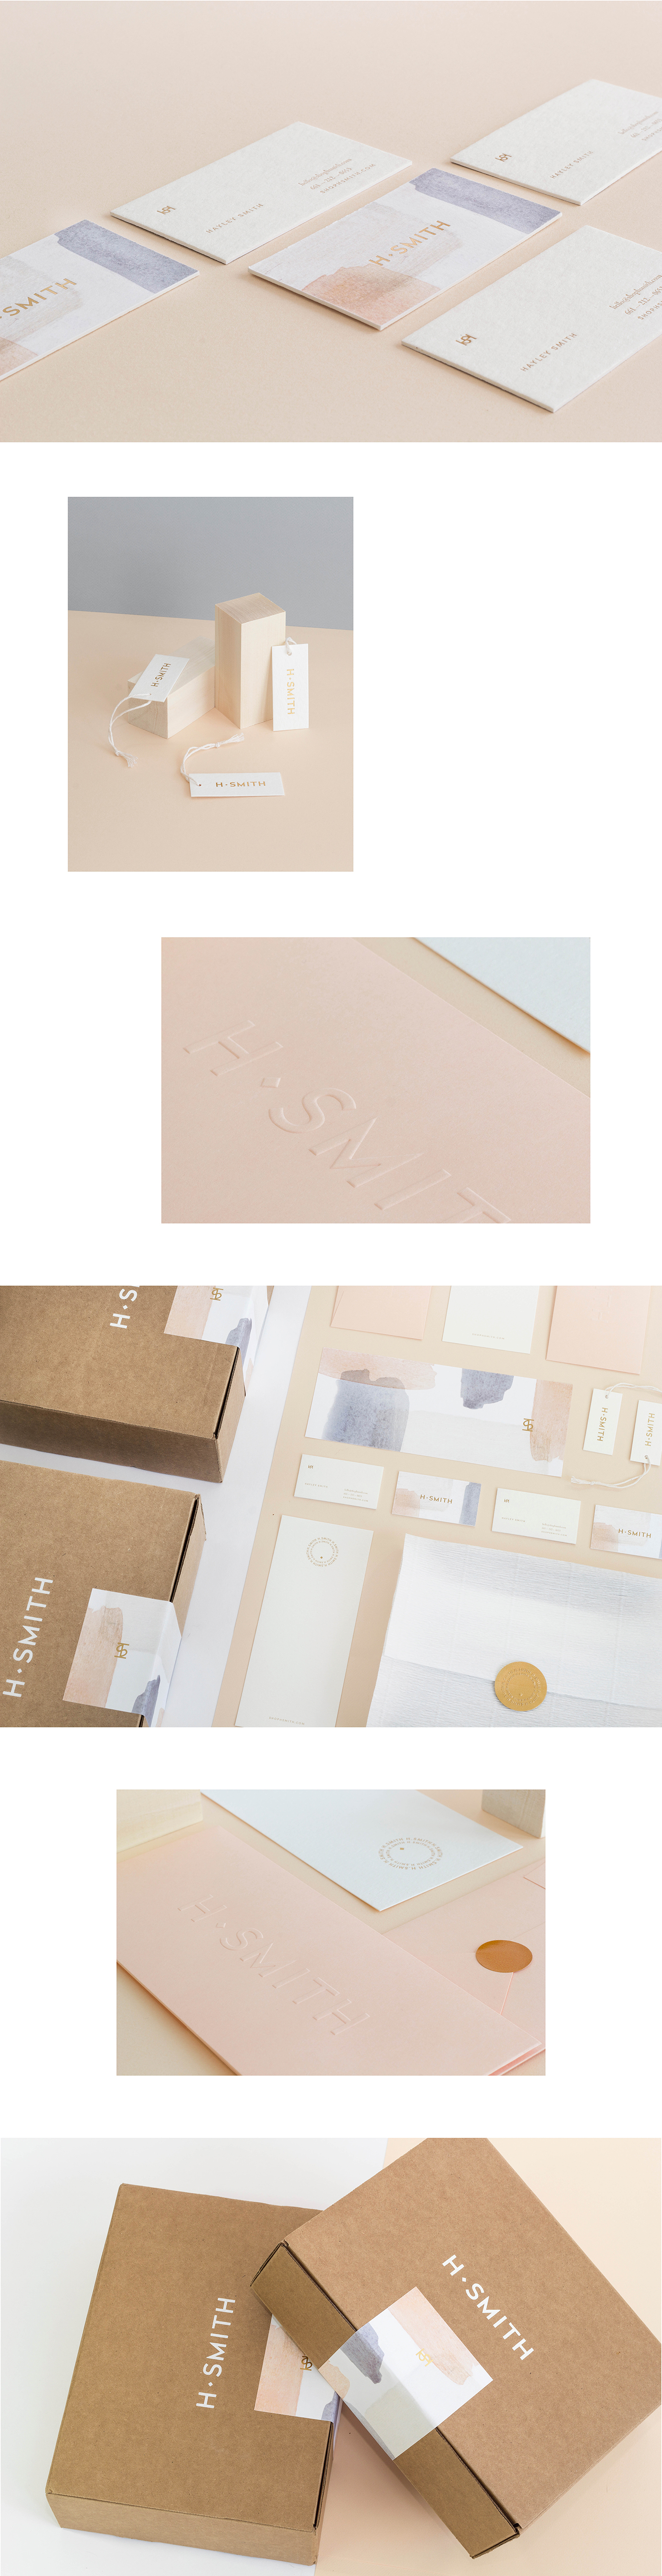 Identity Design Packaging Collateral print